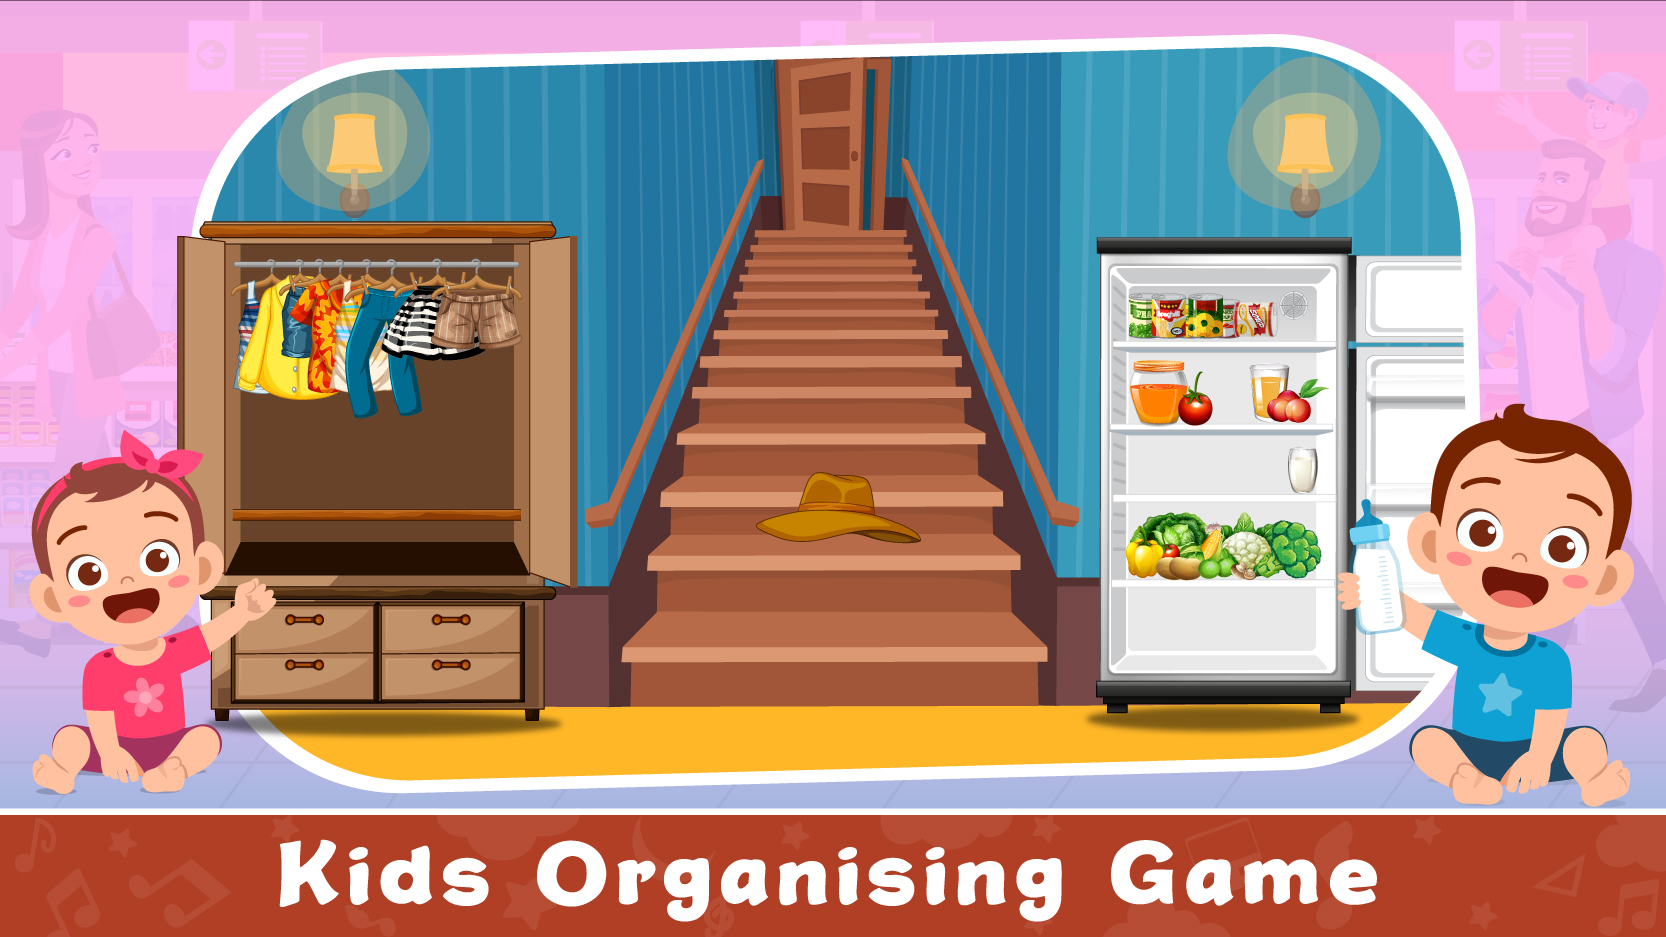 Baby Games: Fun Learning